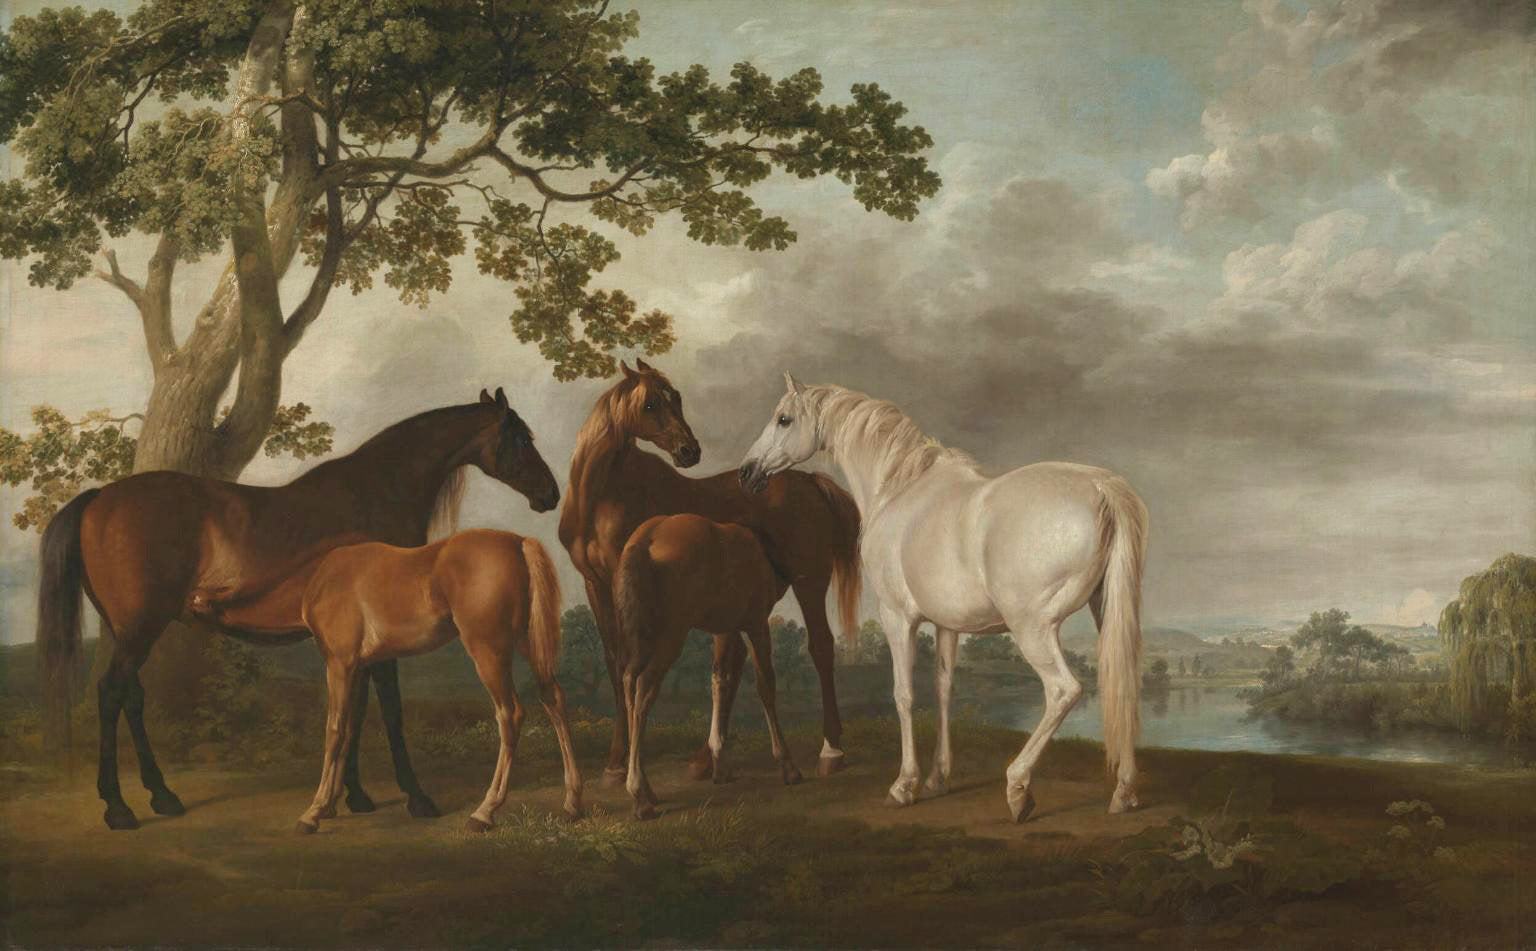 George Stubbs - Mares and Foals in a River Landscape